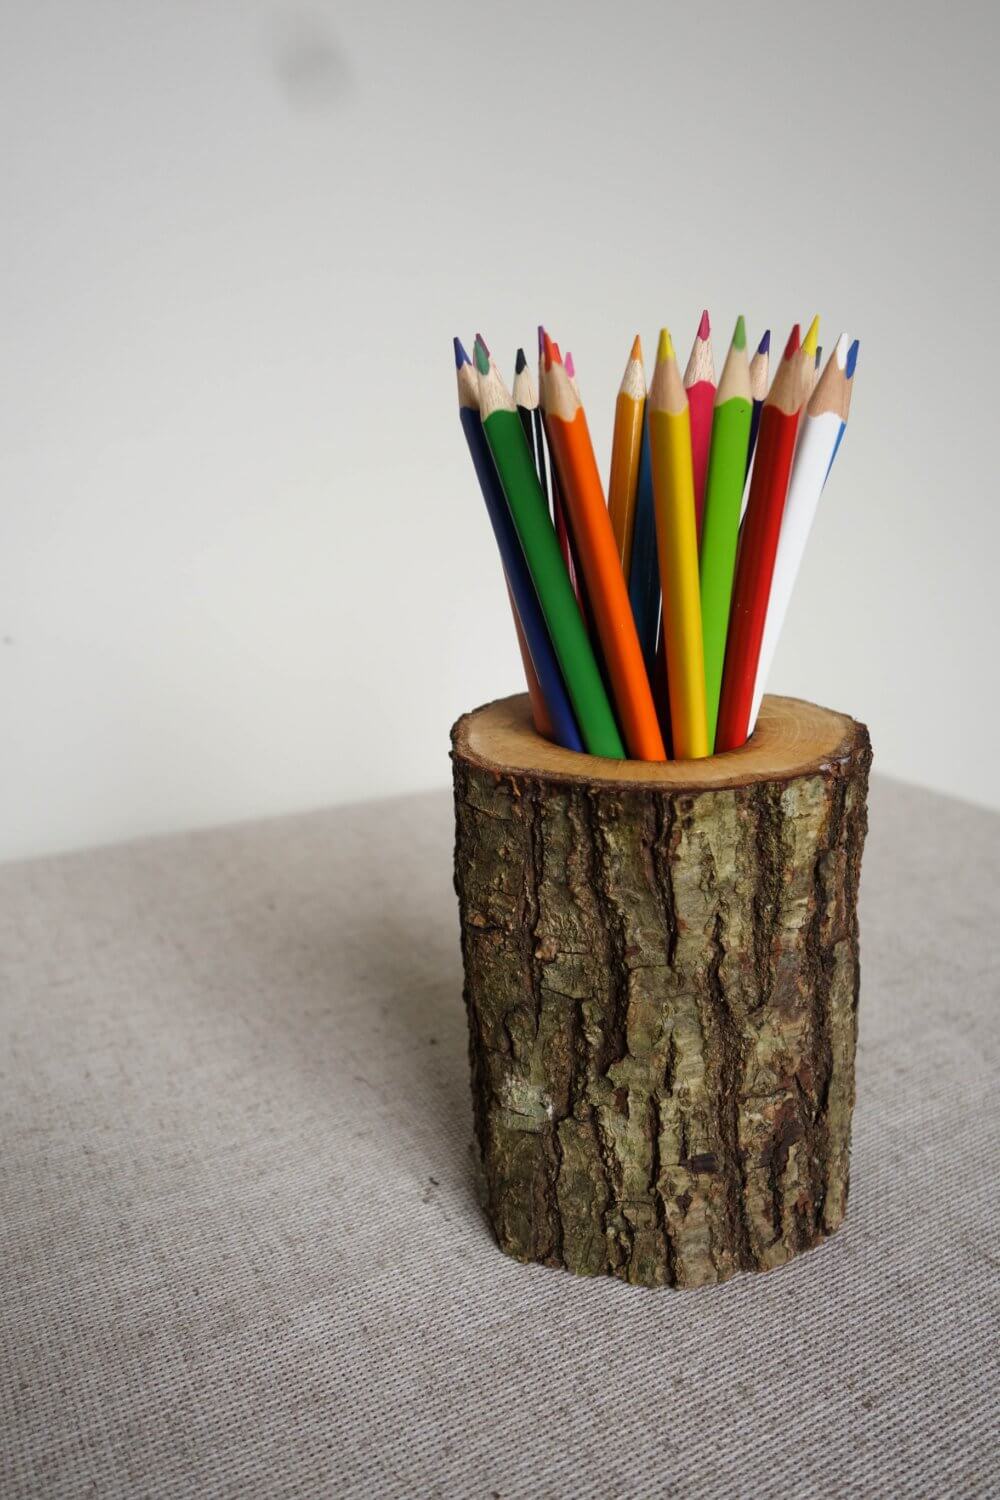 Creative Wooden Pencil Holder Perfect for Organization